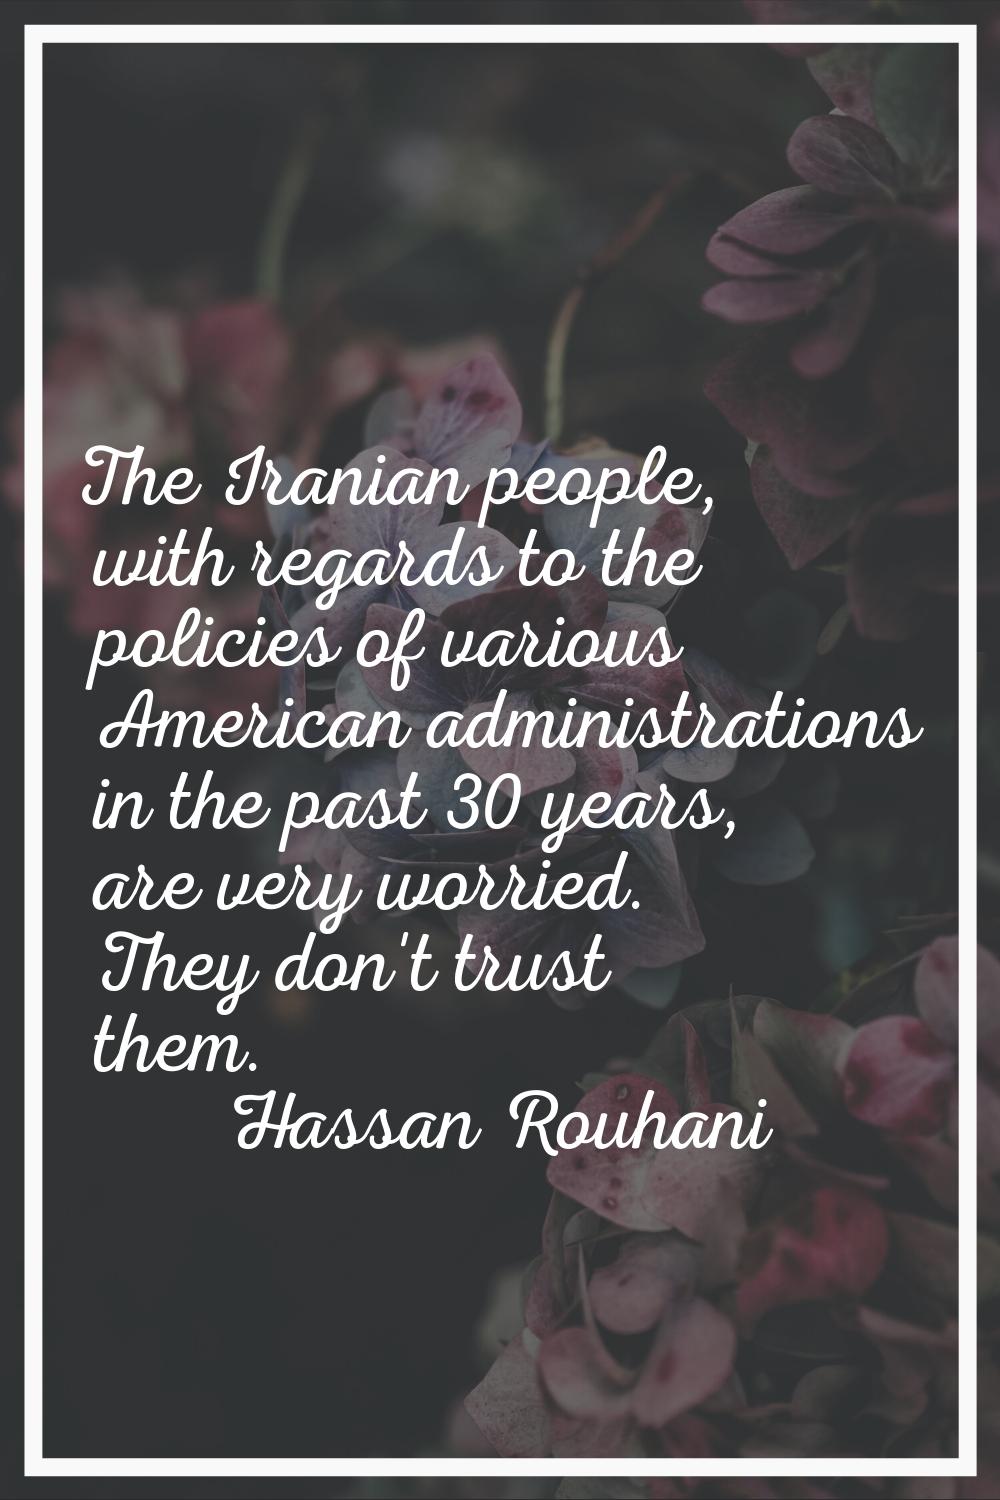 The Iranian people, with regards to the policies of various American administrations in the past 30